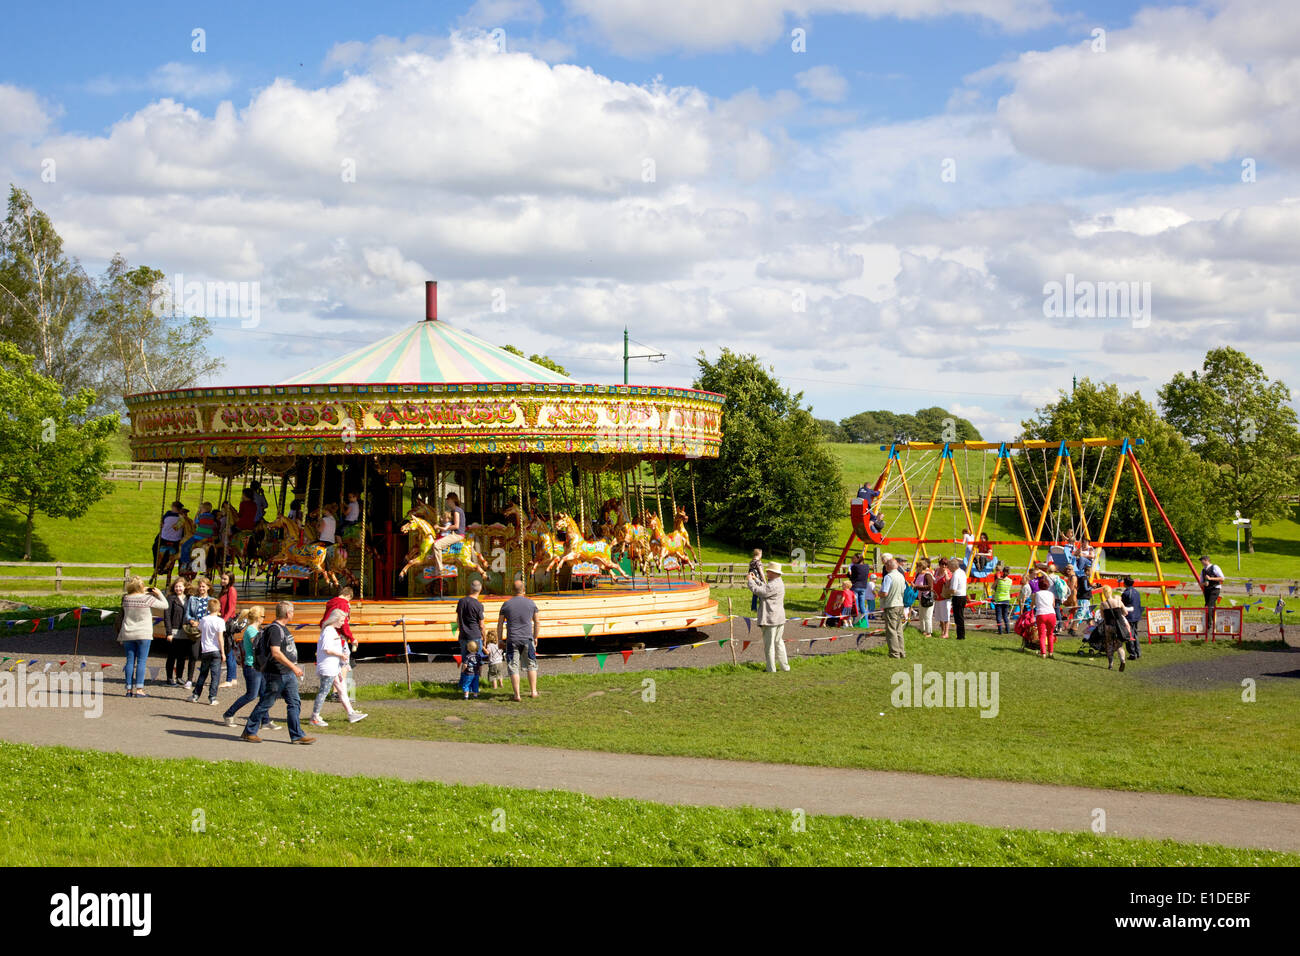 An antique steam carousel situated at Beamish Museum, an open-air museum North-East England. Stock Photo